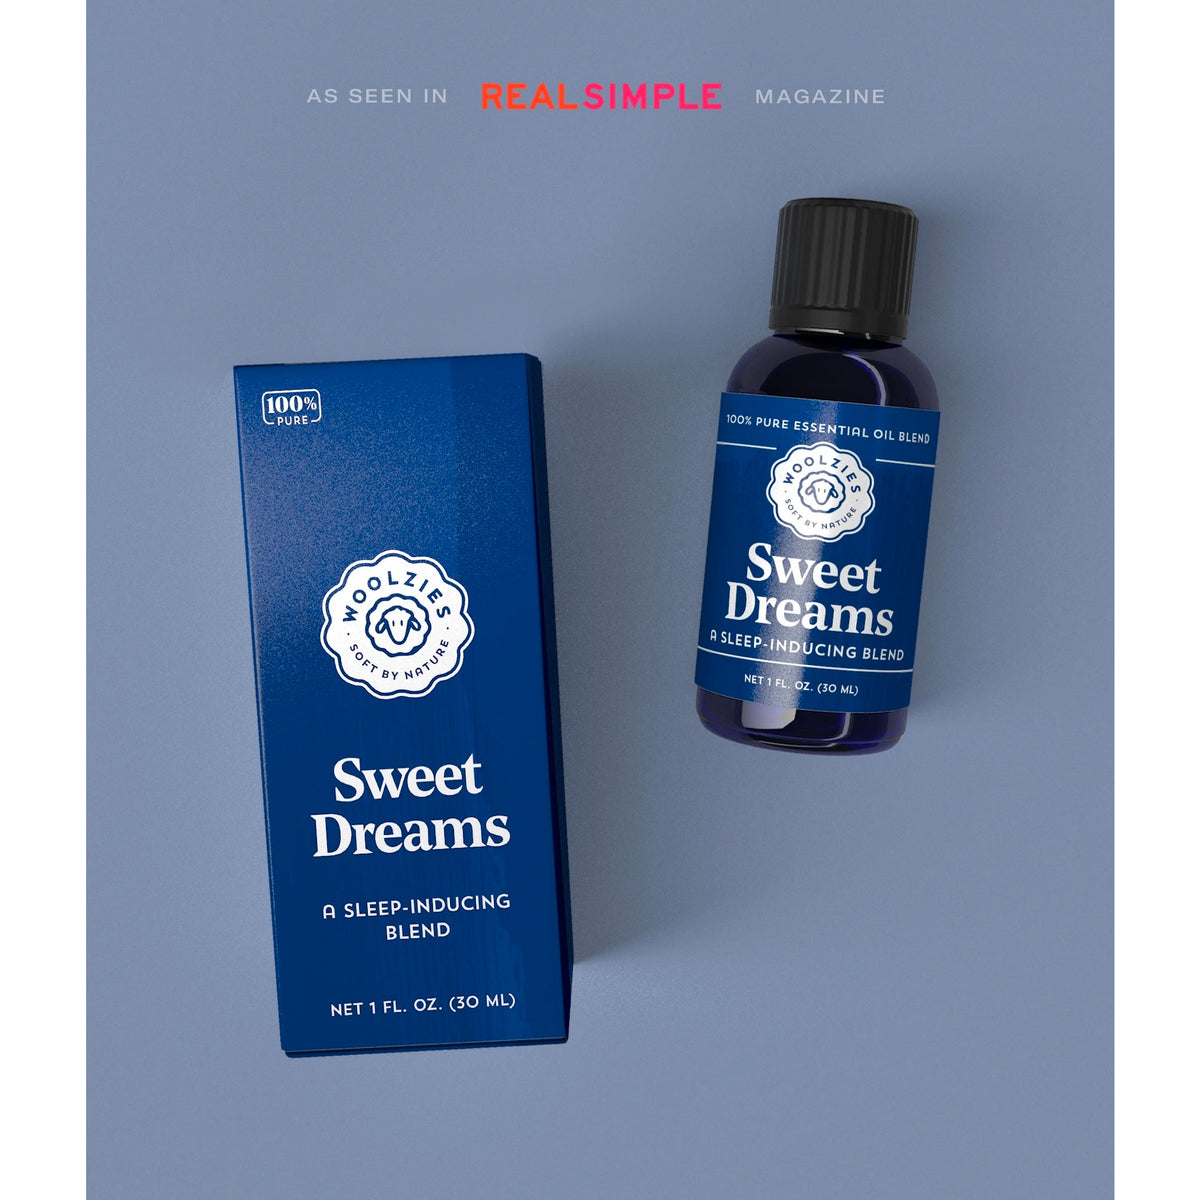 Product display of "Woolzies Sweet Dreams Blend" for insomnia relief, featuring a bottle and box with blue labels, set against a gray background with the "Real Simple" magazine logo.